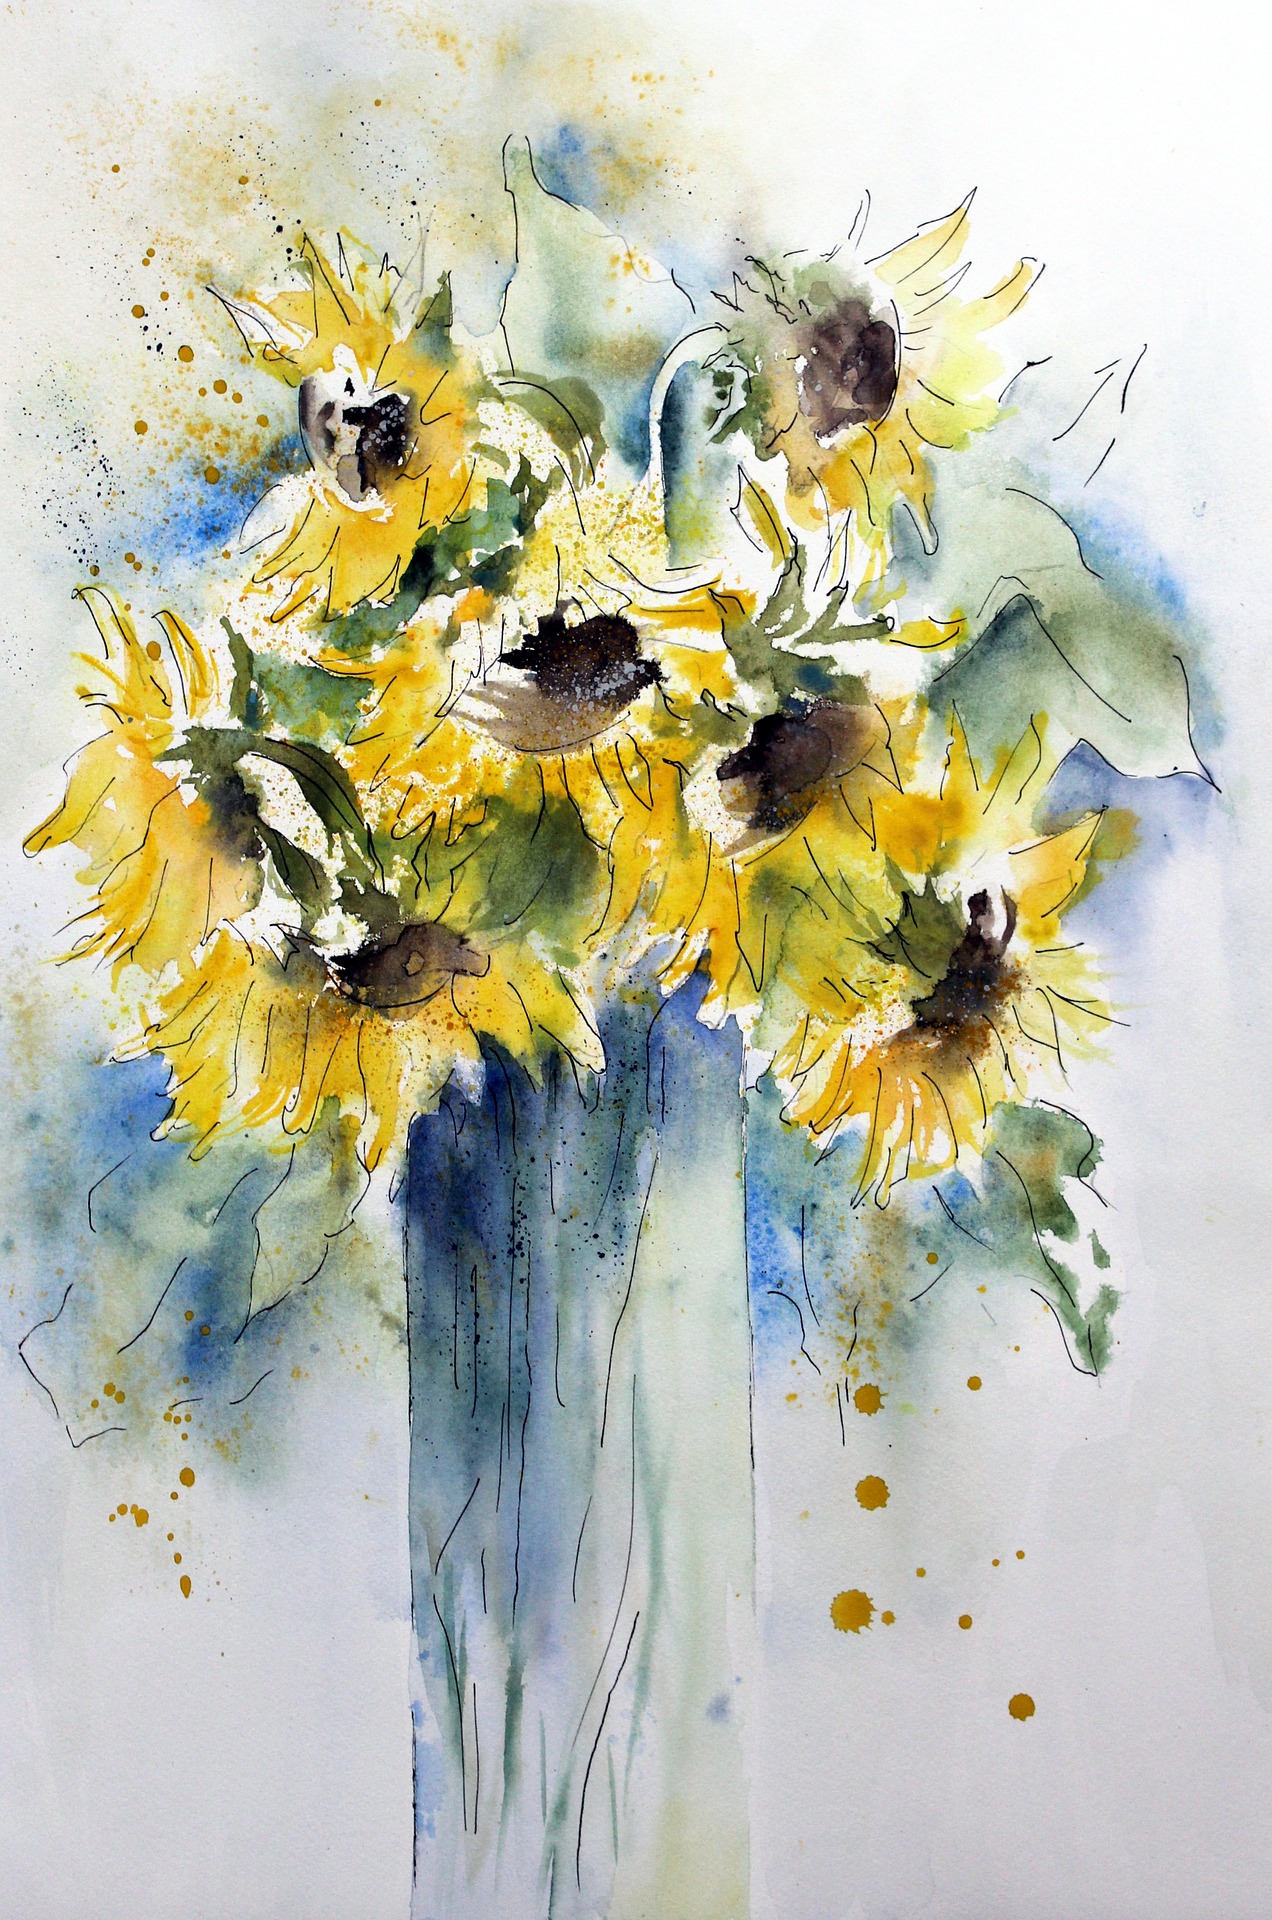 Watercolor Sunflowers July 11, 2021